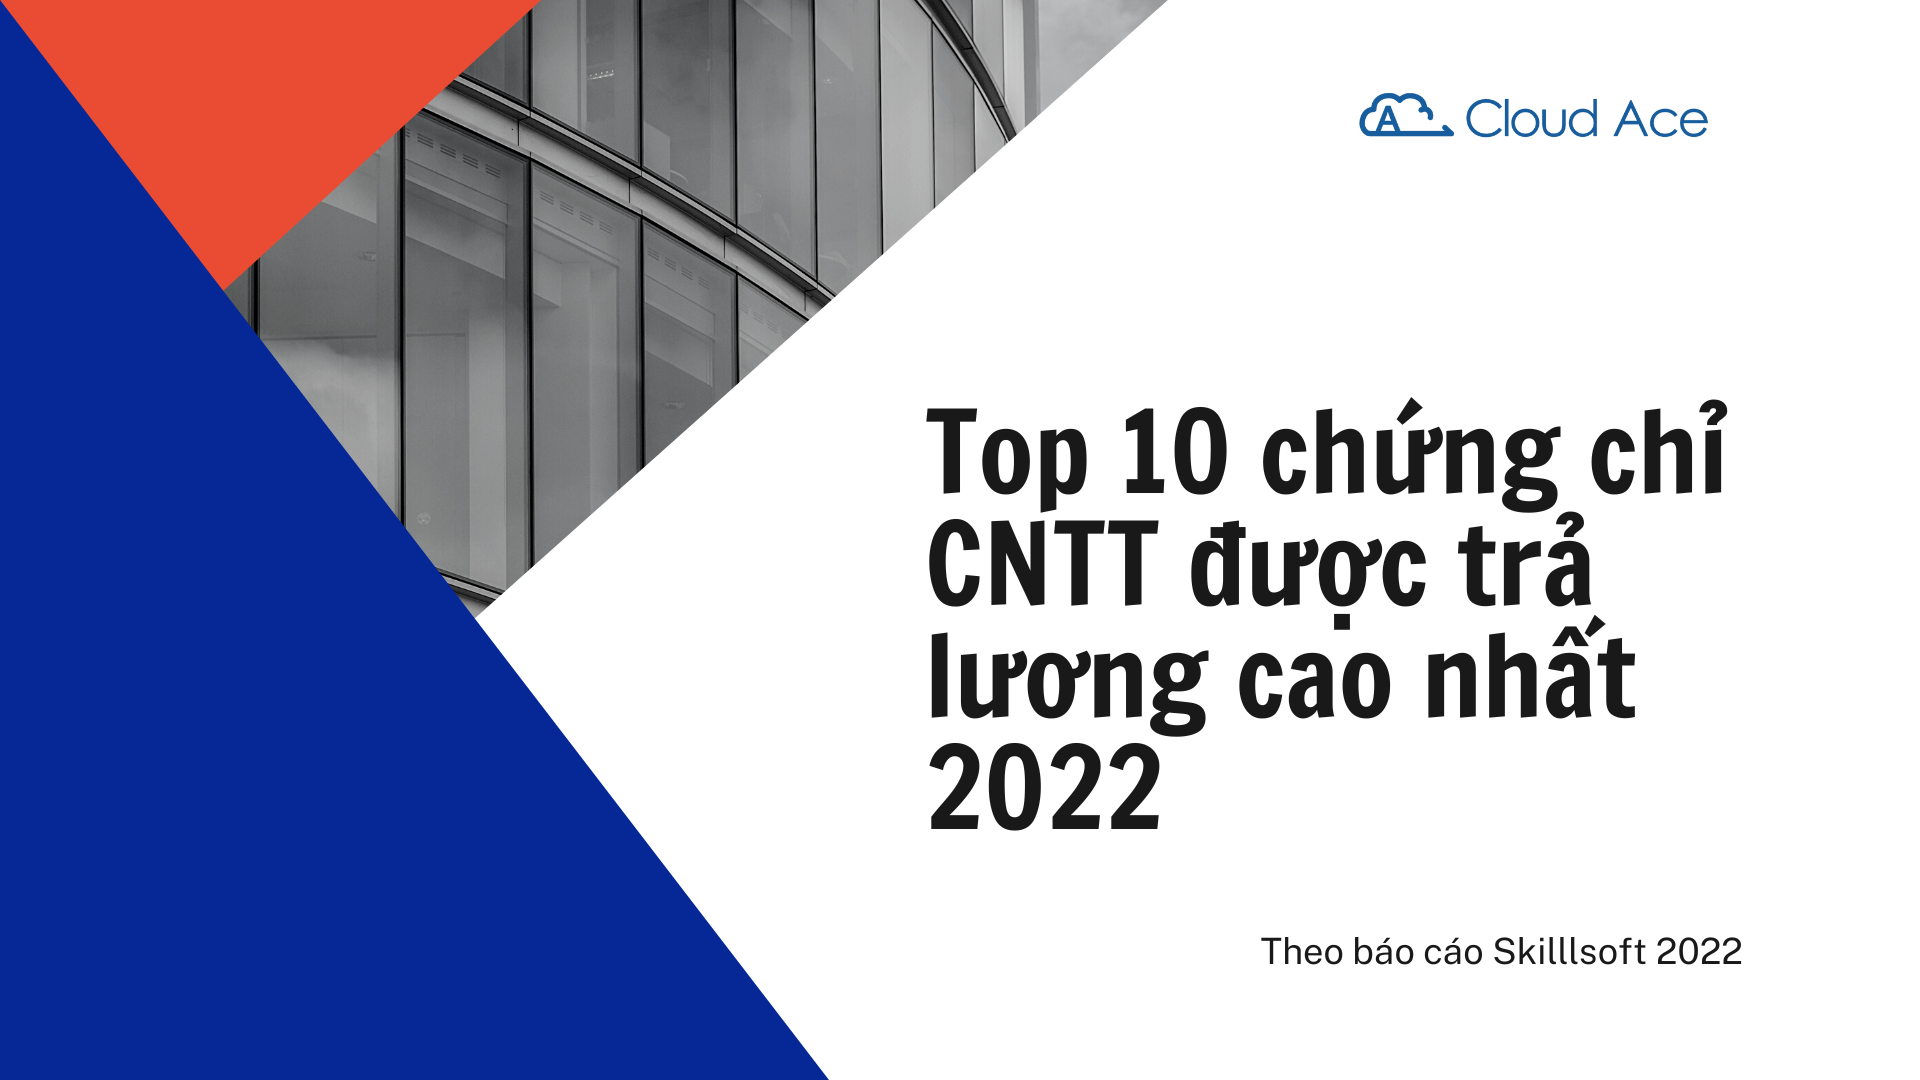 Top-10-chung-chi-CNTT-duoc-tra-luong-cao-nhat-nam-2022